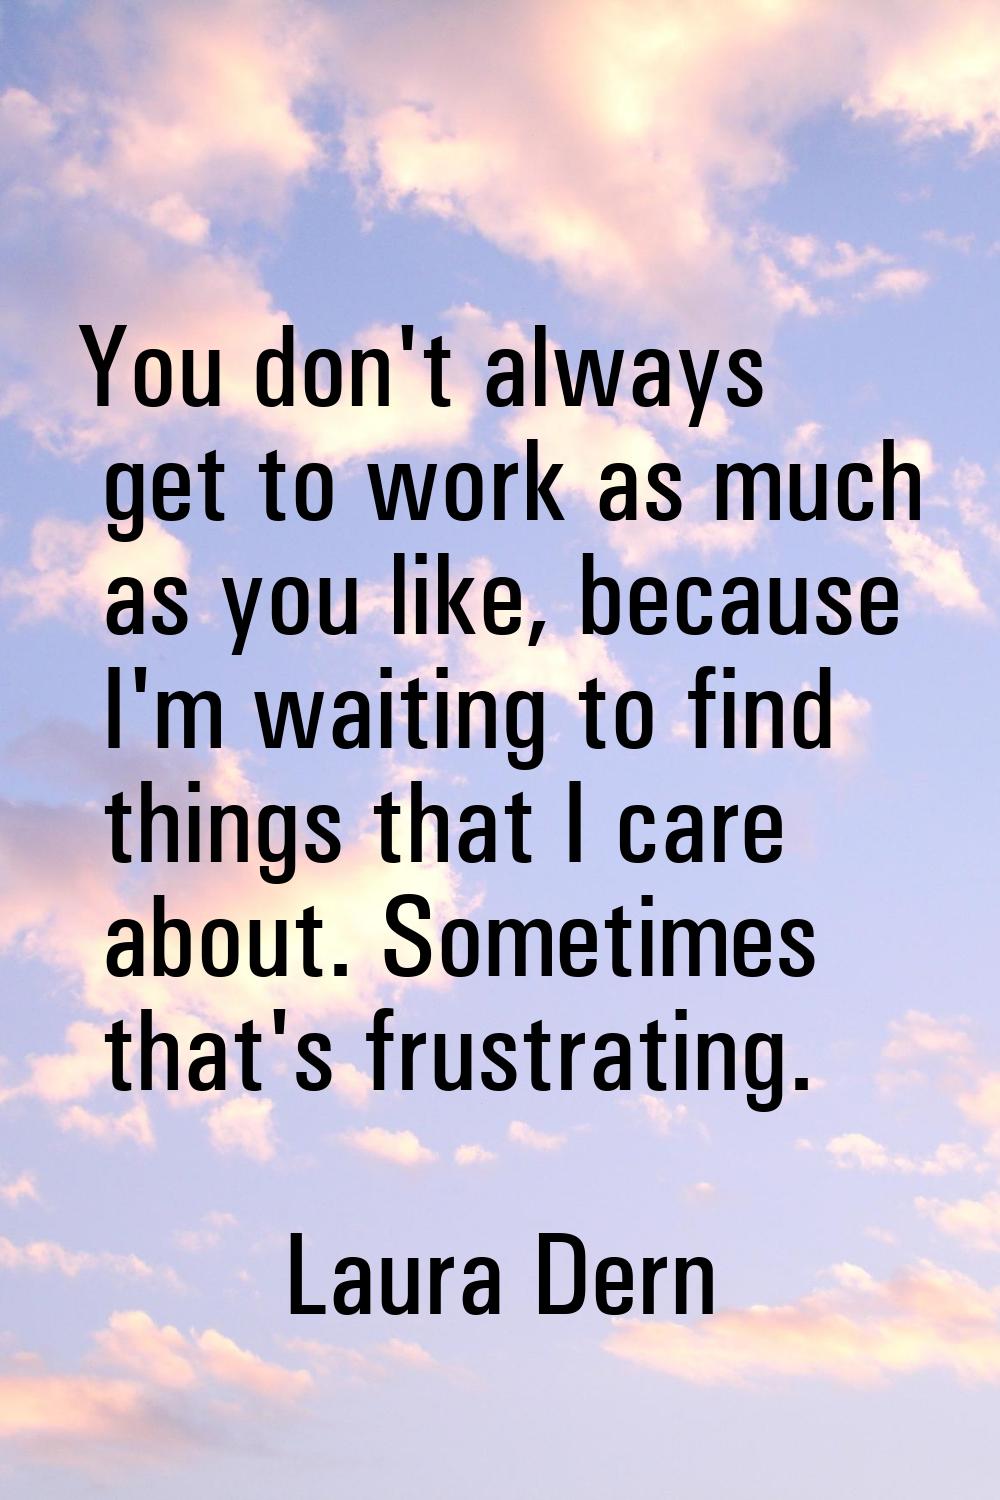 You don't always get to work as much as you like, because I'm waiting to find things that I care ab